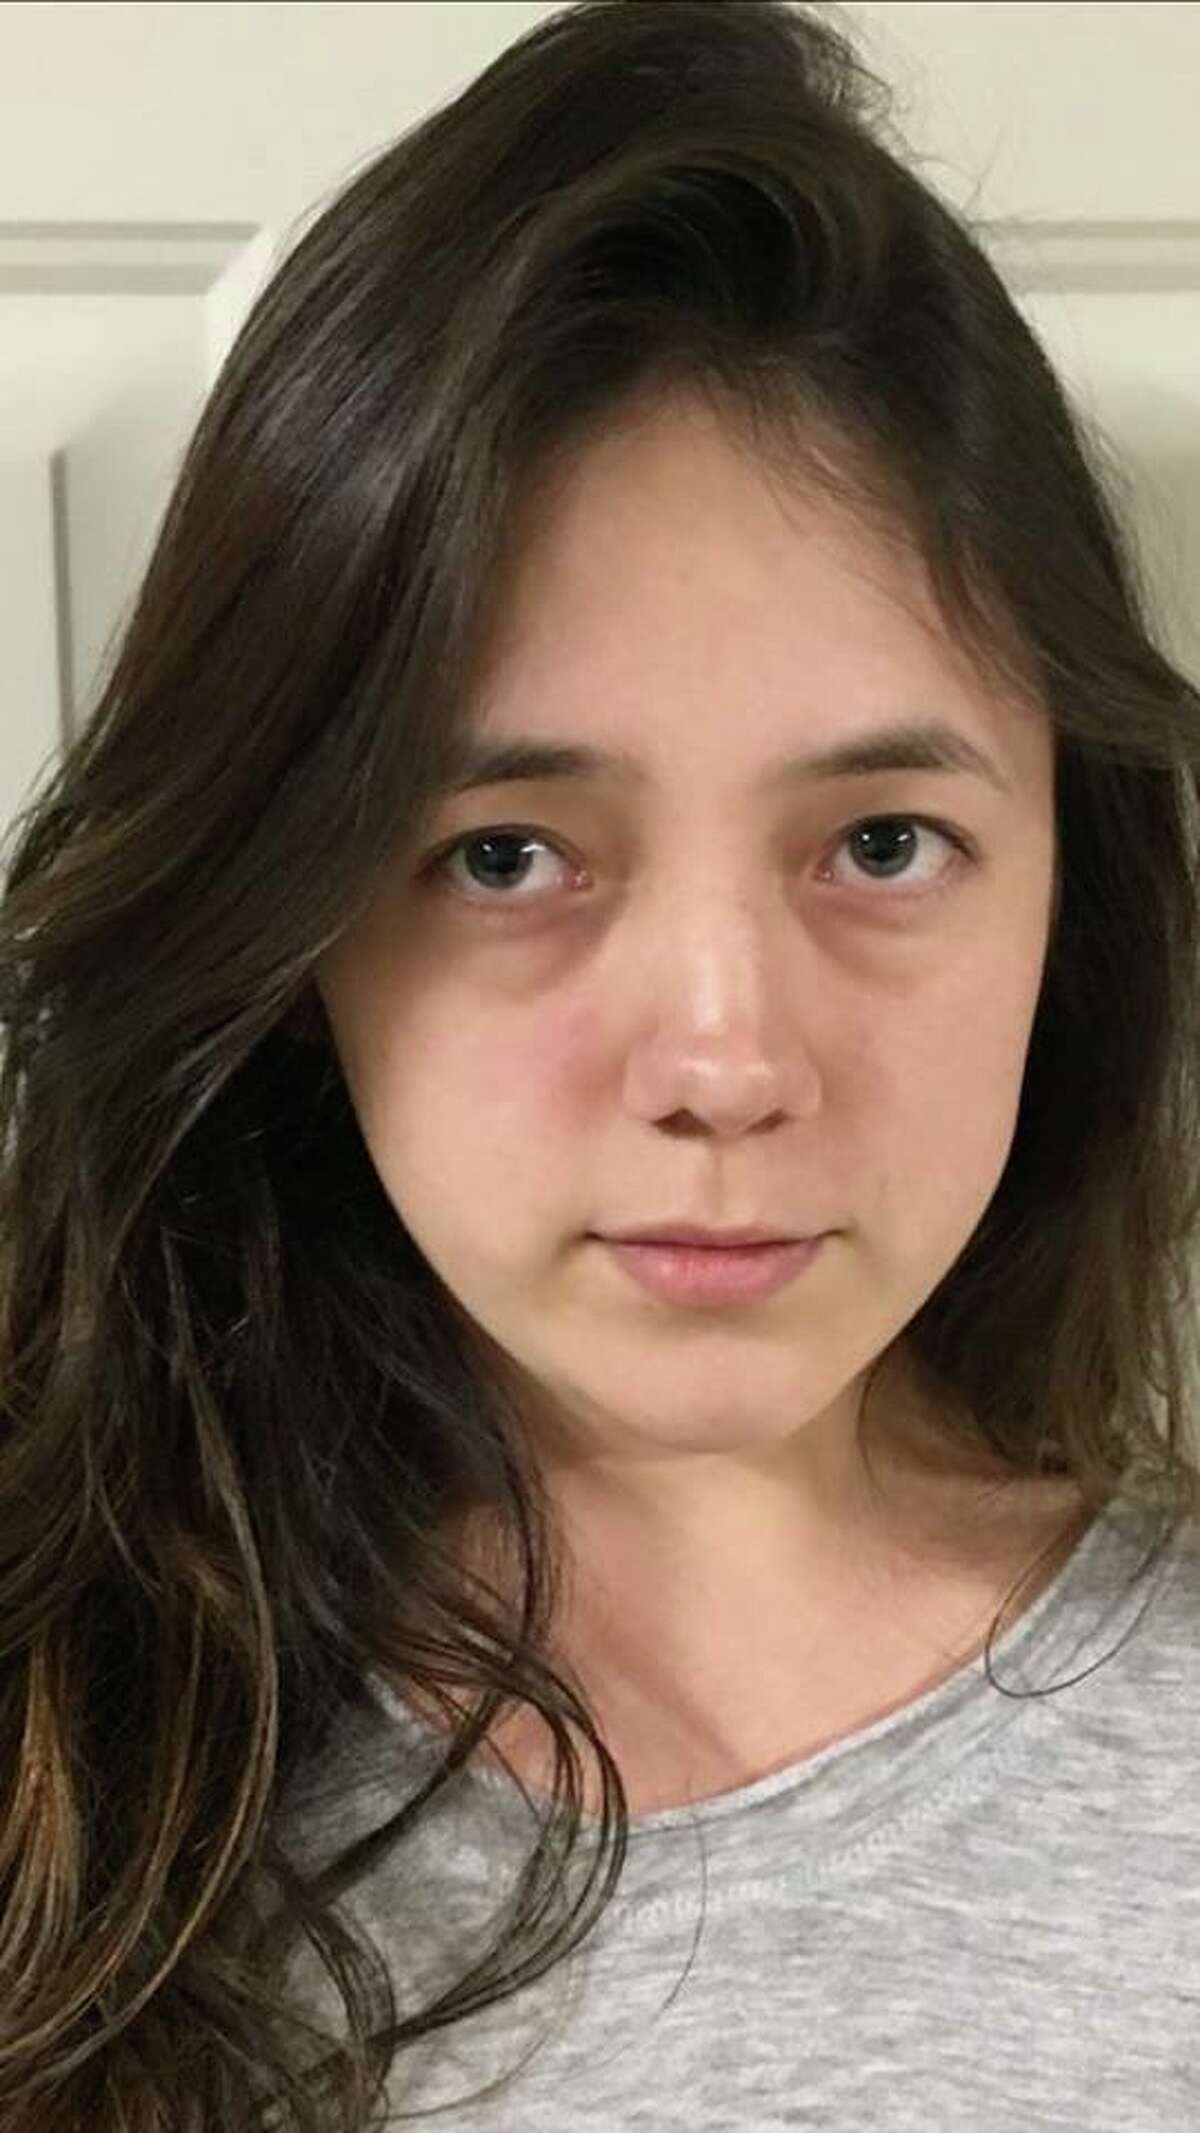 Claudia Kopacka, of Oklahoma, accused of traveling to Meridian to have sex with what she believed was a child, according to local authorities. 